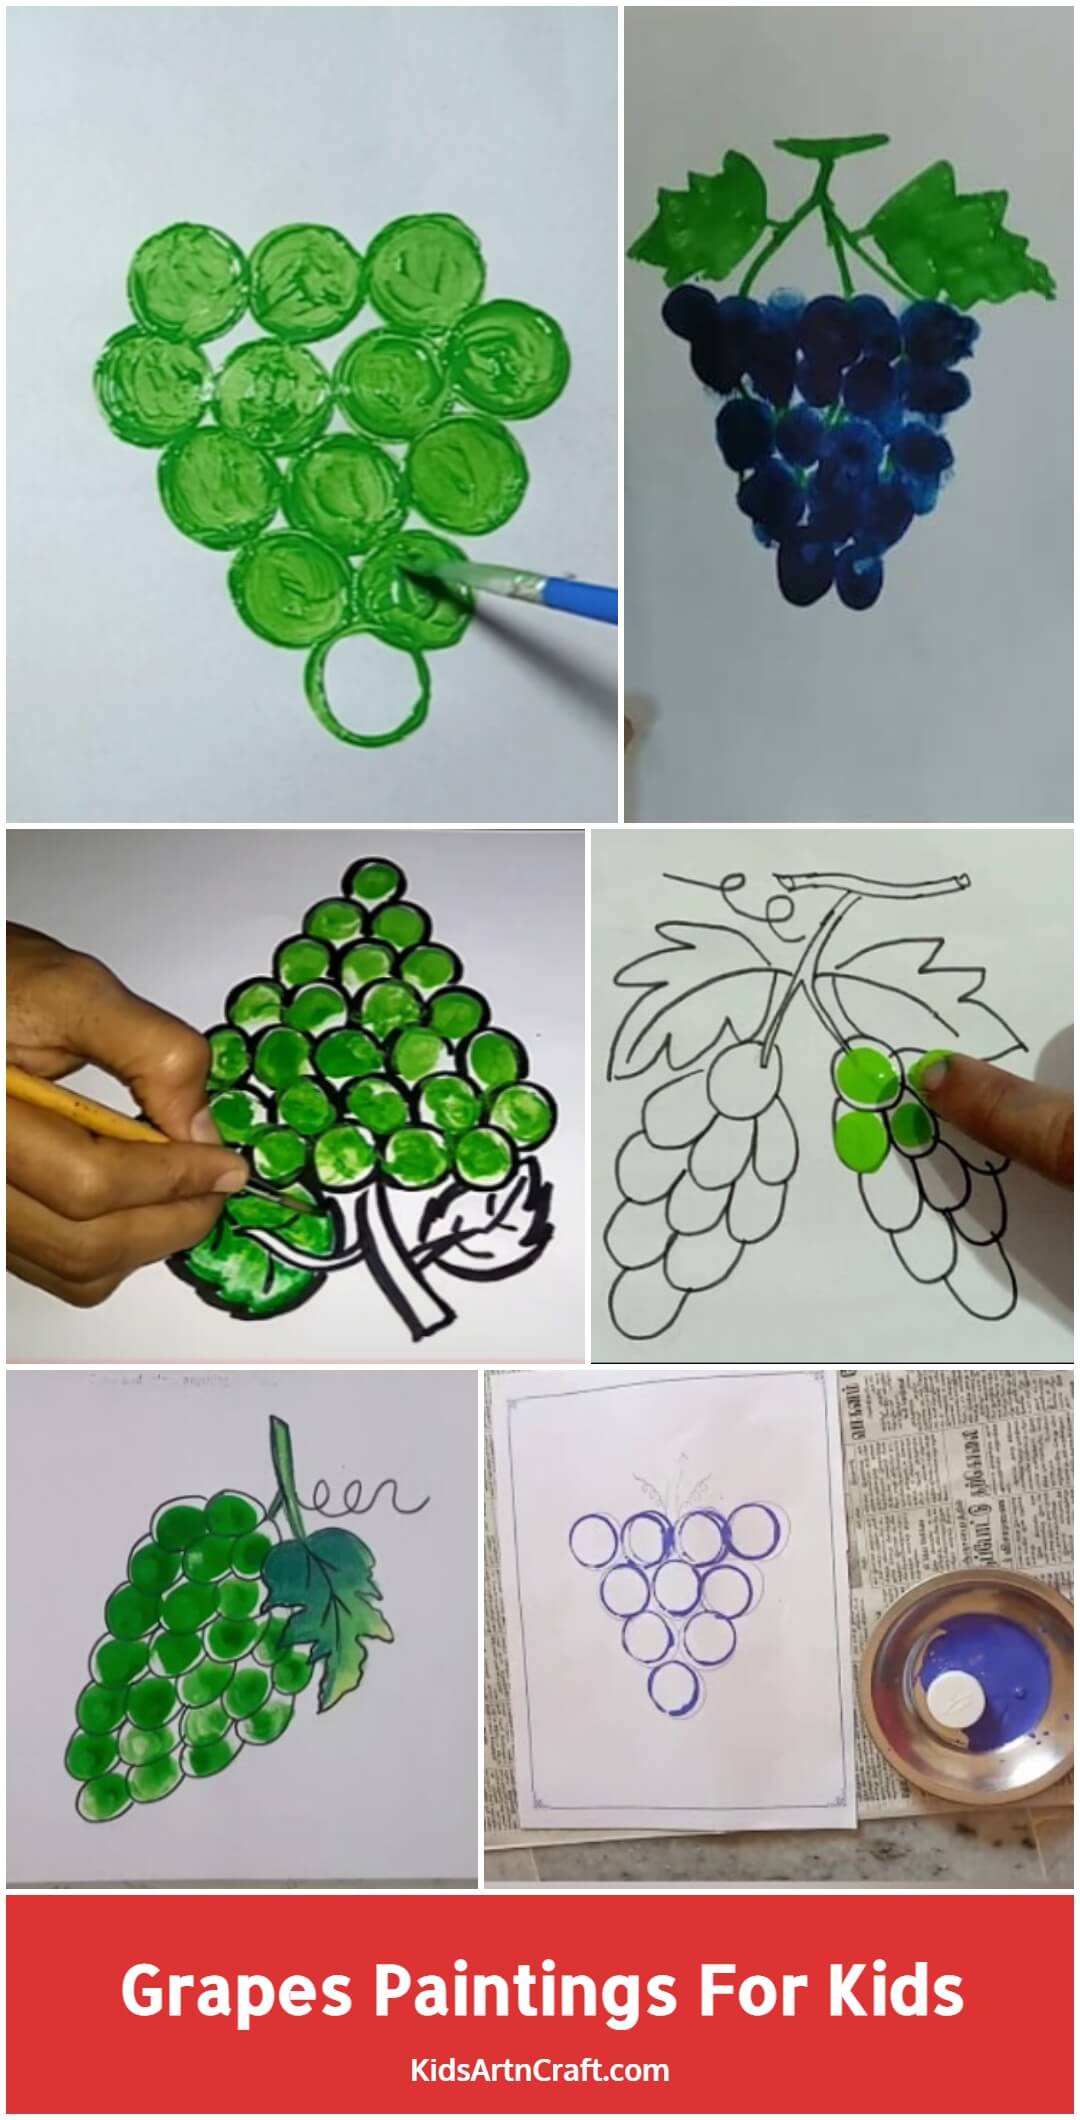 Grapes Paintings for Kids